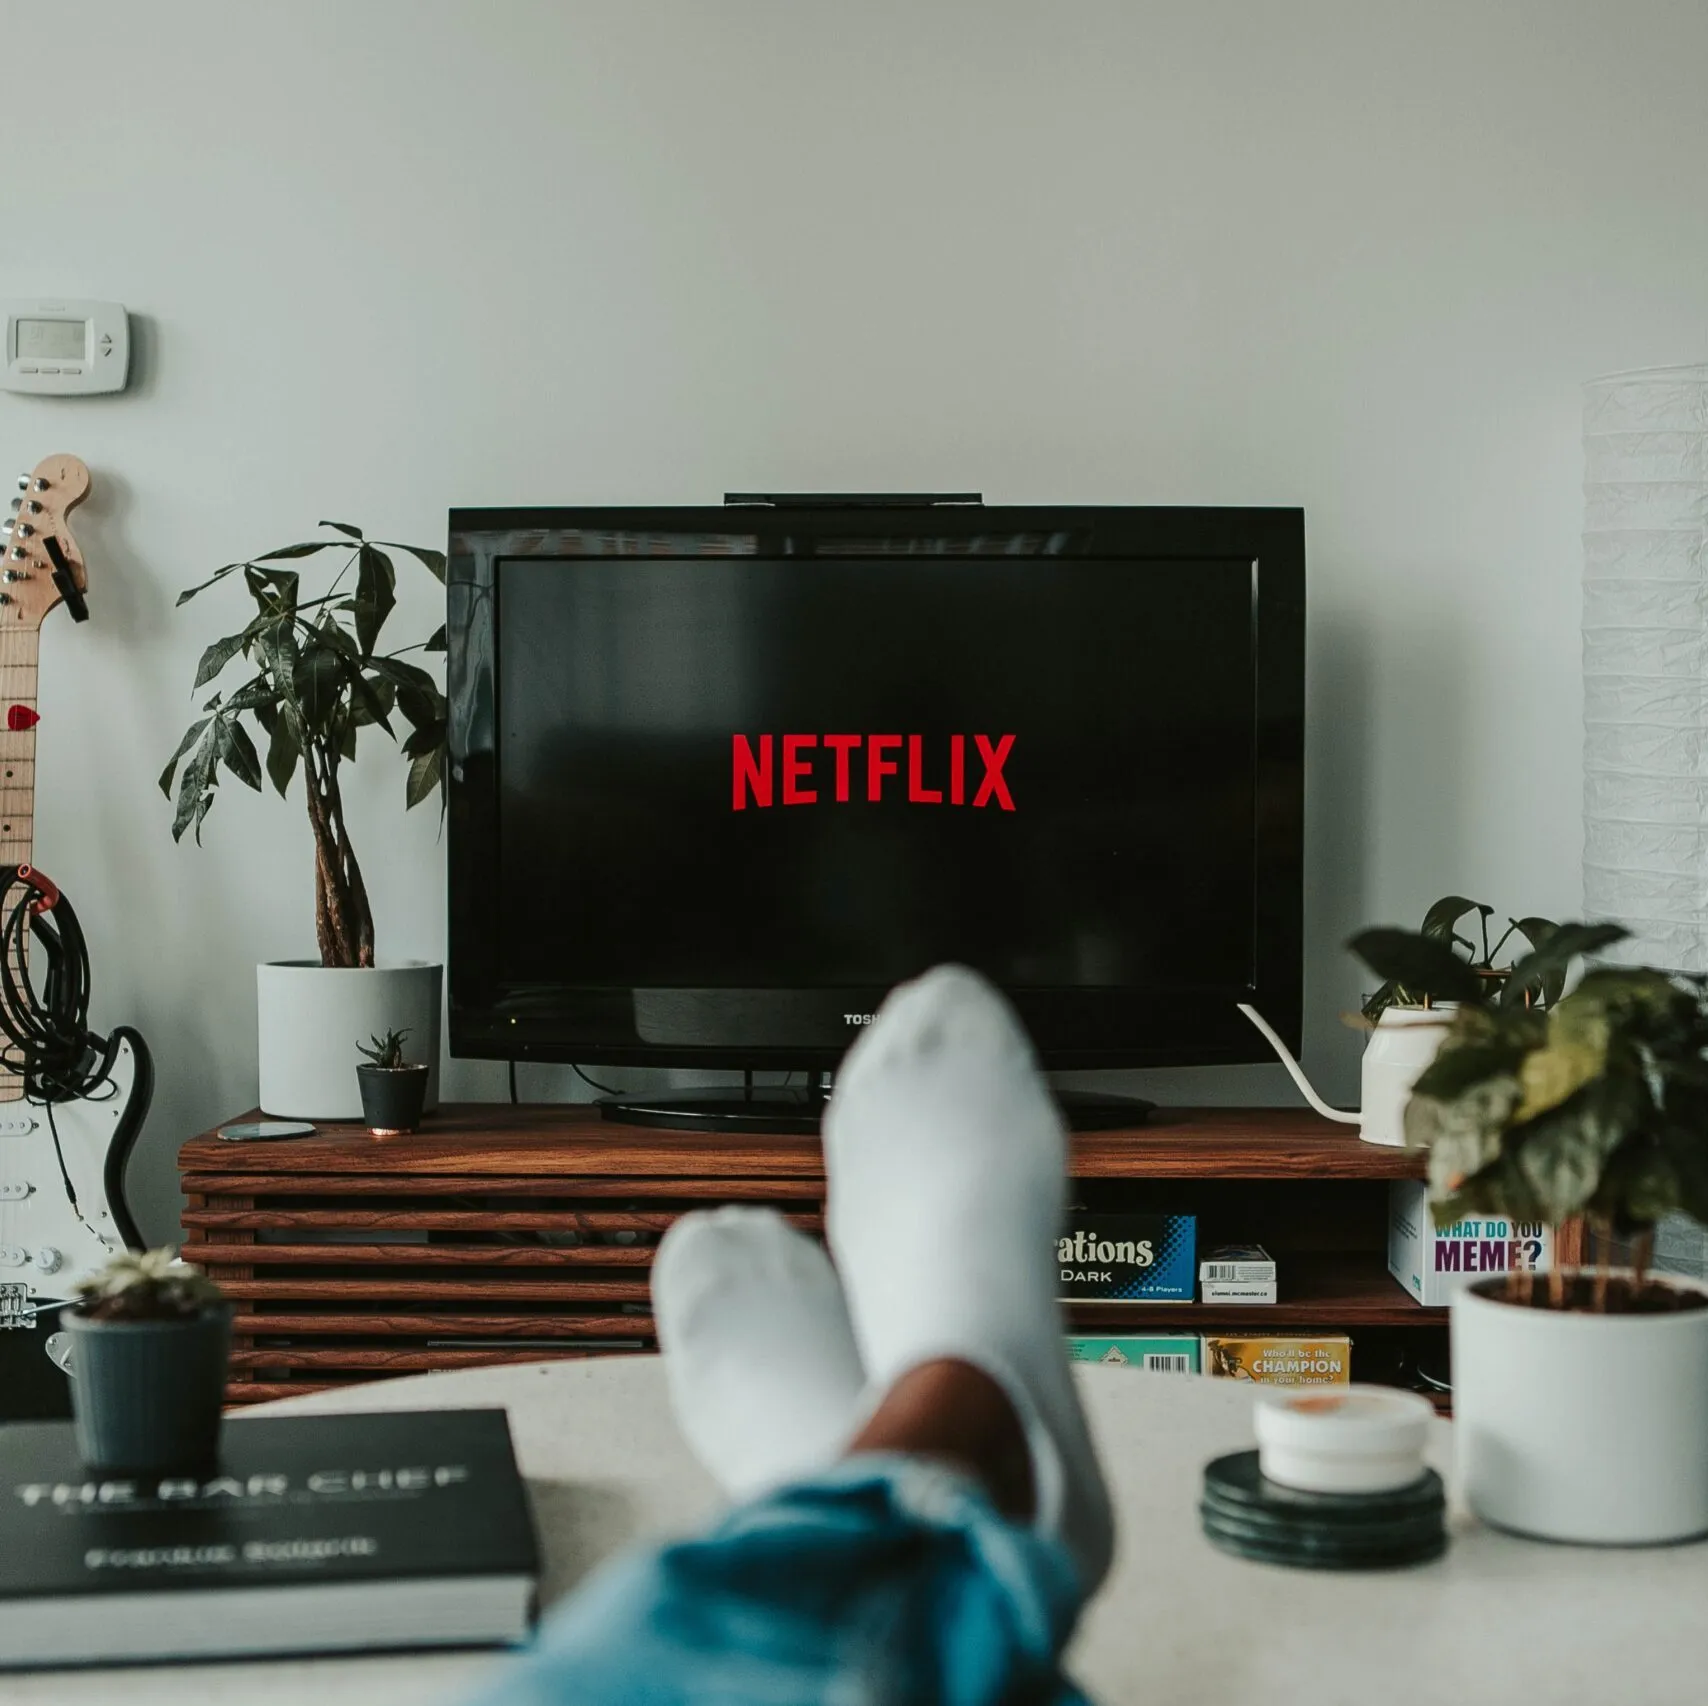 East Africa has a US$290,000 Netflix financial assistance to African creatives. www.theexchange.africa